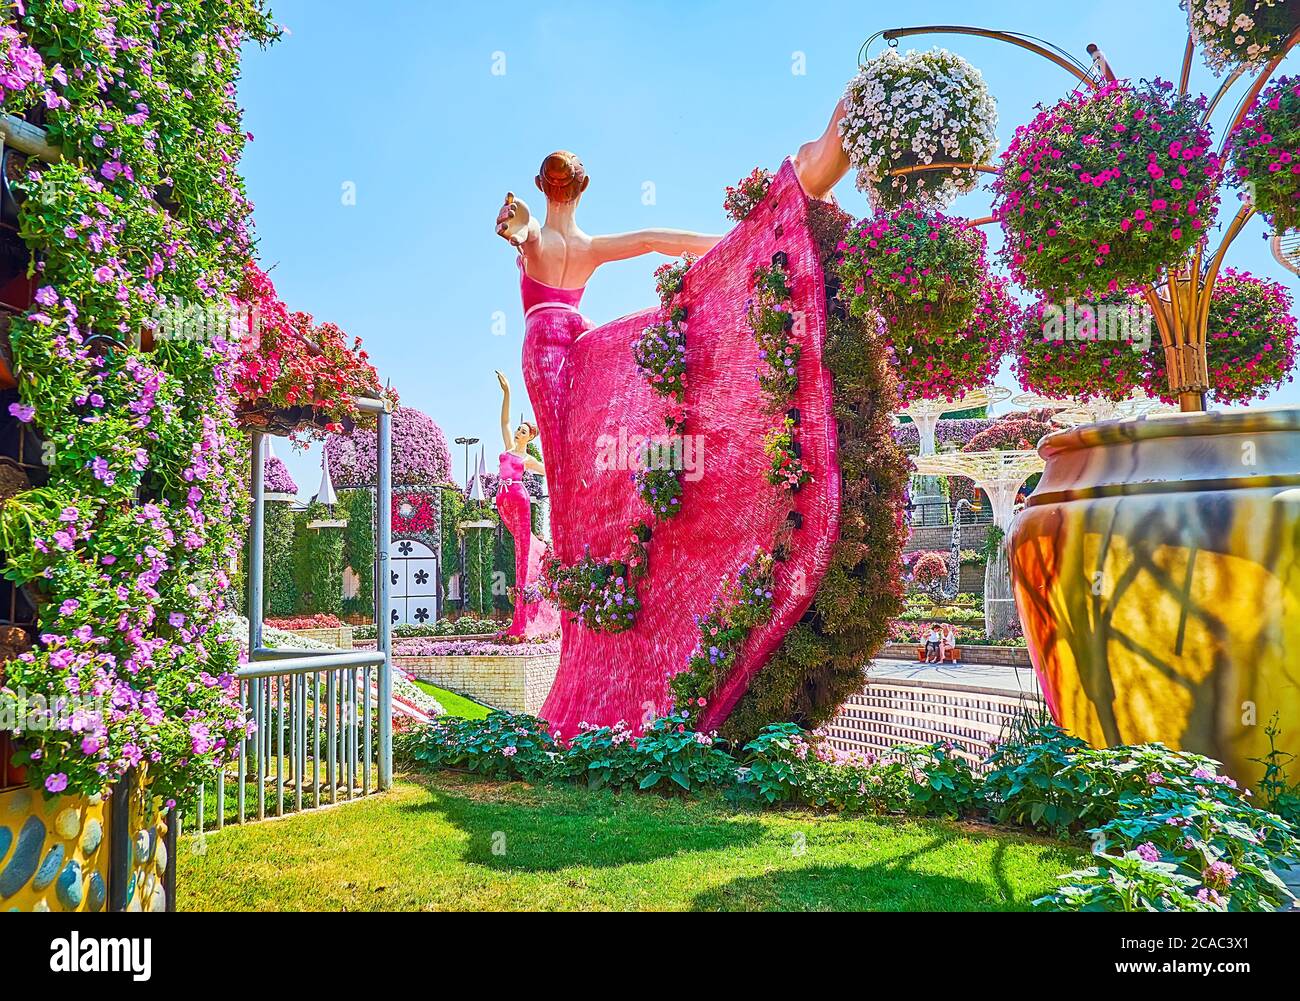 Dubai Uae March 5 2020 The Colored Ballerinas Installations In Miracle Garden On March 5 In Dubai Stock Photo Alamy